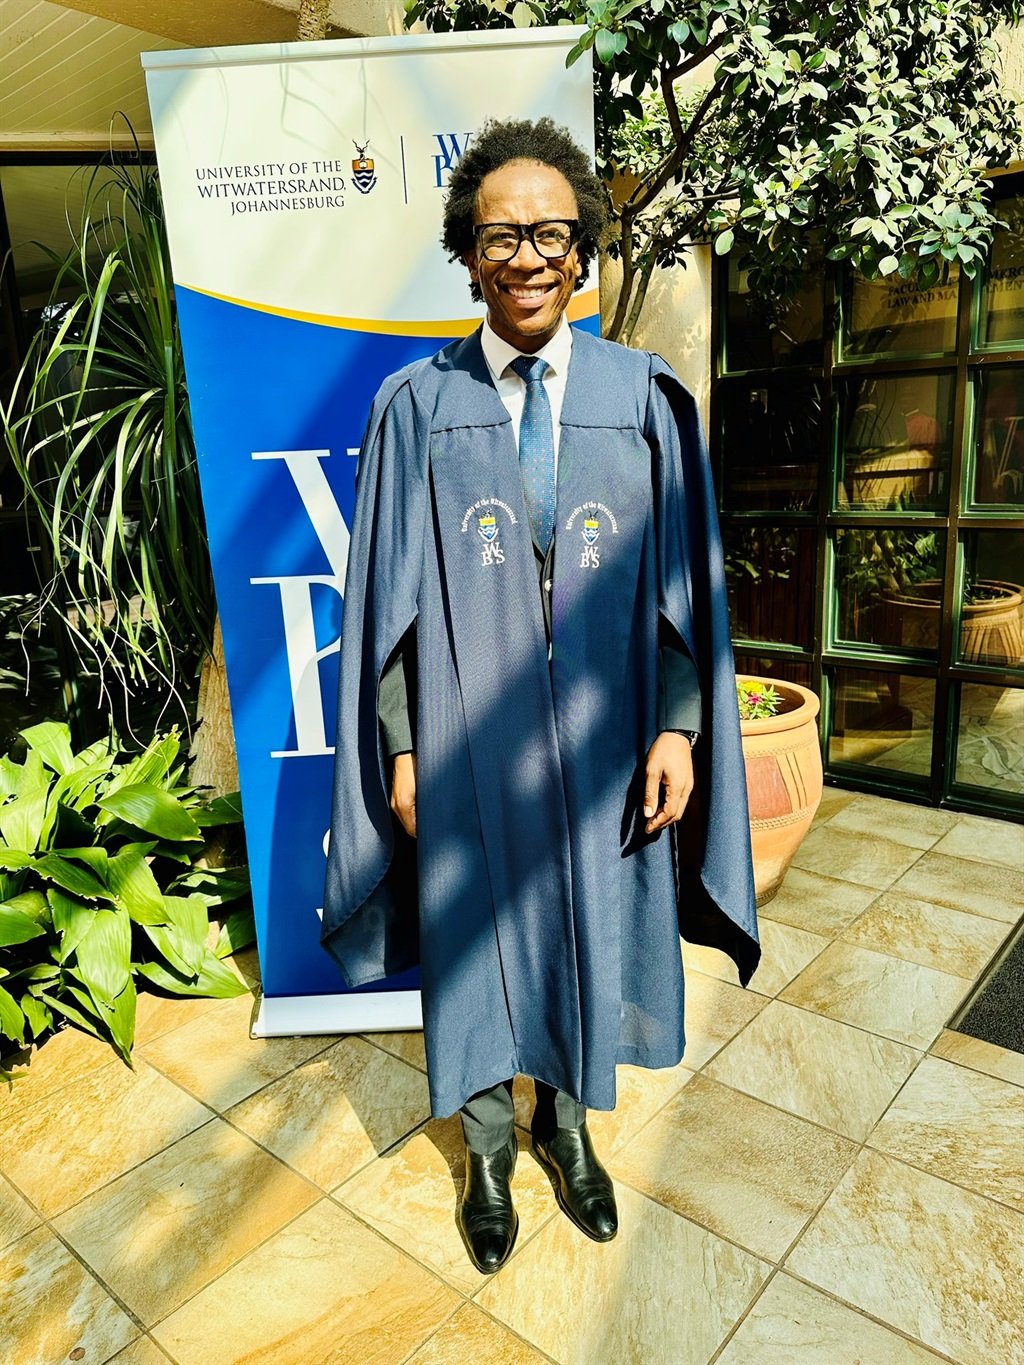 Lumphumlo 'Lupi' Ngcayisa, who said education remains one of the greatest achievements in life. 